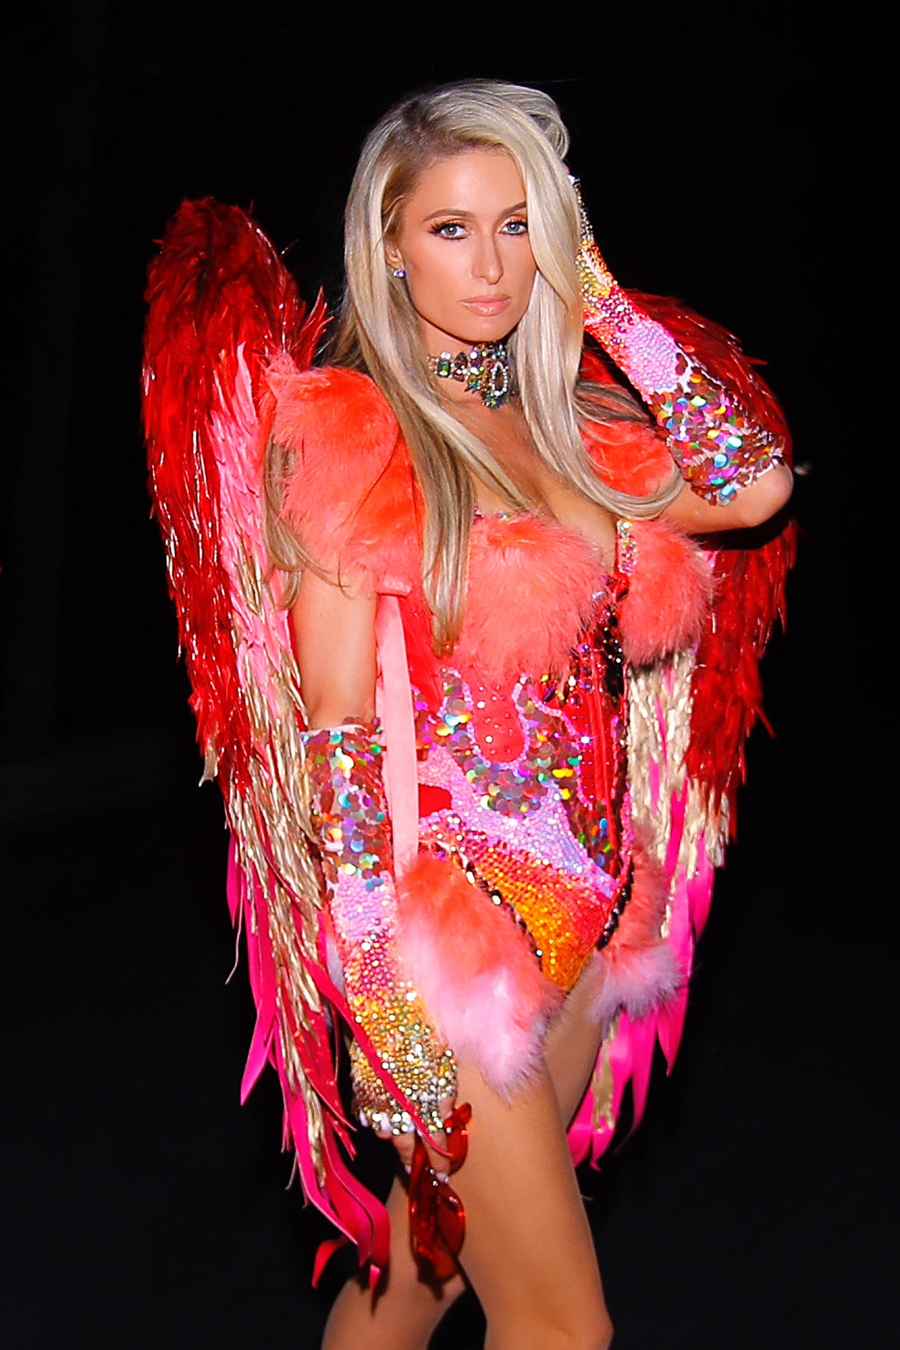 Paris Hilton See What Halloween Costumes the Stars Are Wearing This Spooky Season!